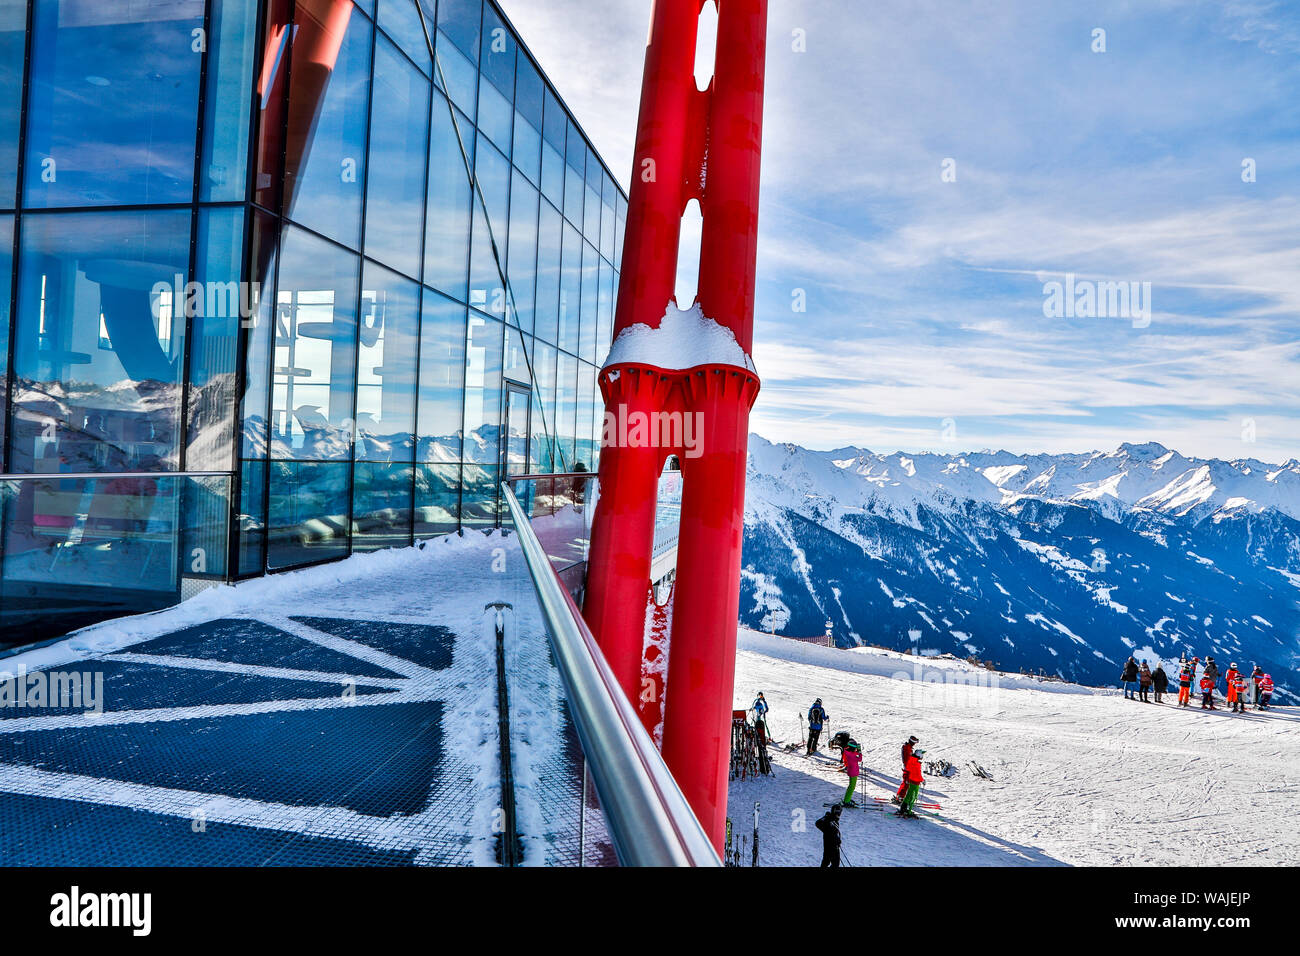 Austria, Kals am Grossglockner. Reflection of the mountains in the windows of the Adler Lounge in Kals, Austria Stock Photo